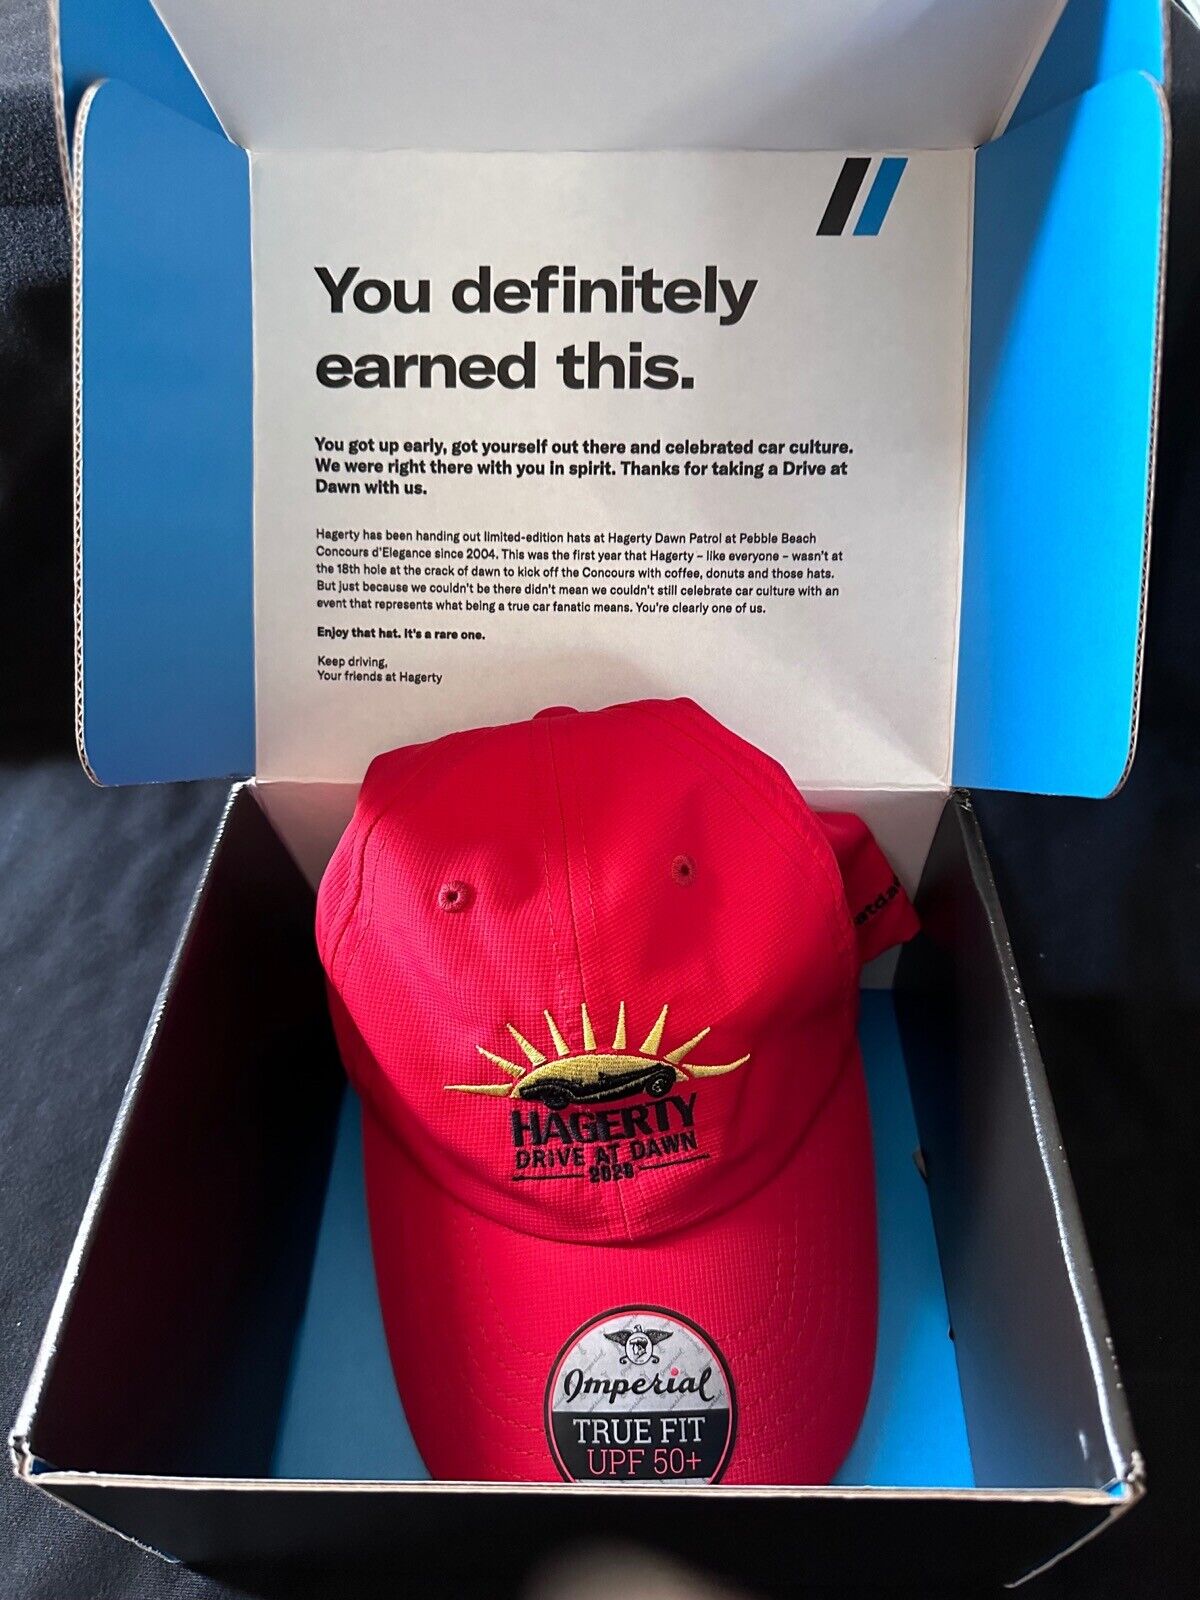 NEW 2020 DAWN PATROL Hat Cap w/Box Hagerty Canceled Pebble Beach Concours 